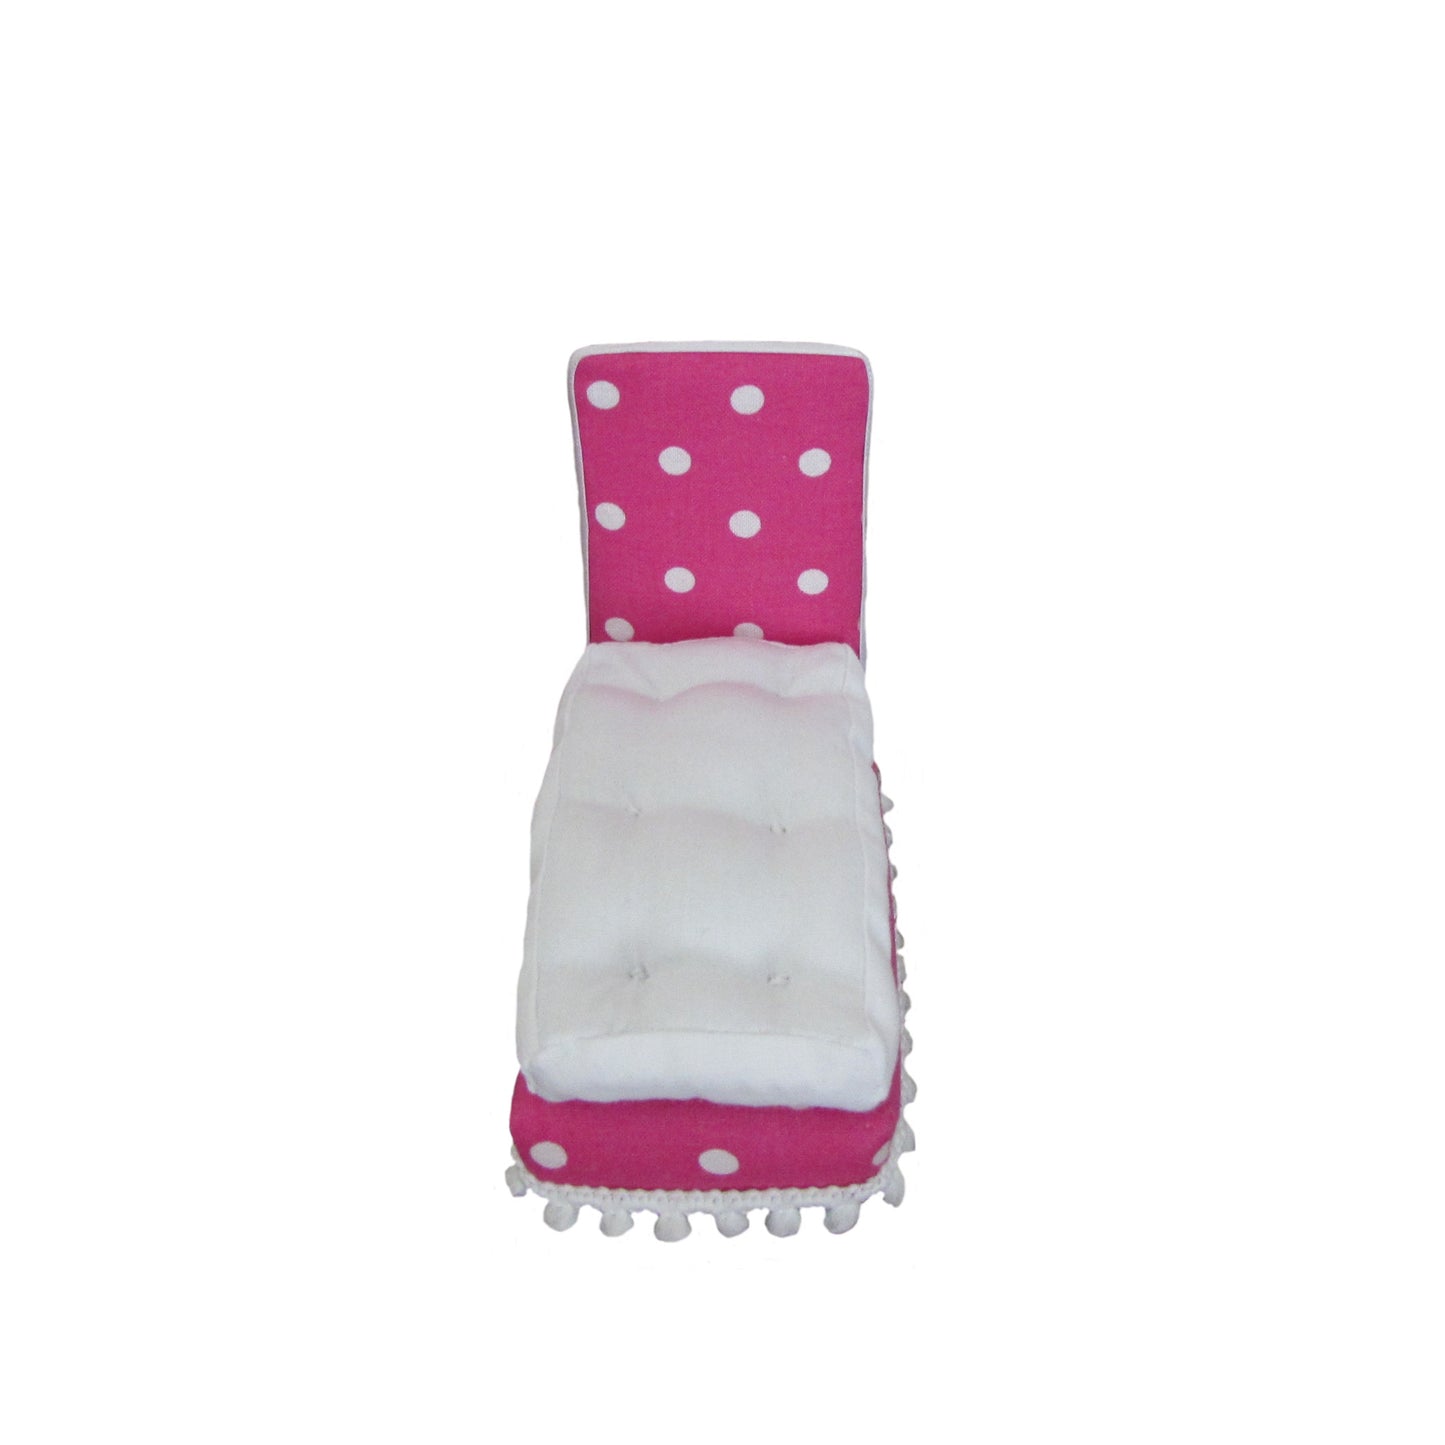 Bright Pink Dots Upholstered Doll Bed and Mattress for White Dots Doll Bedspread for 3-inch dolls